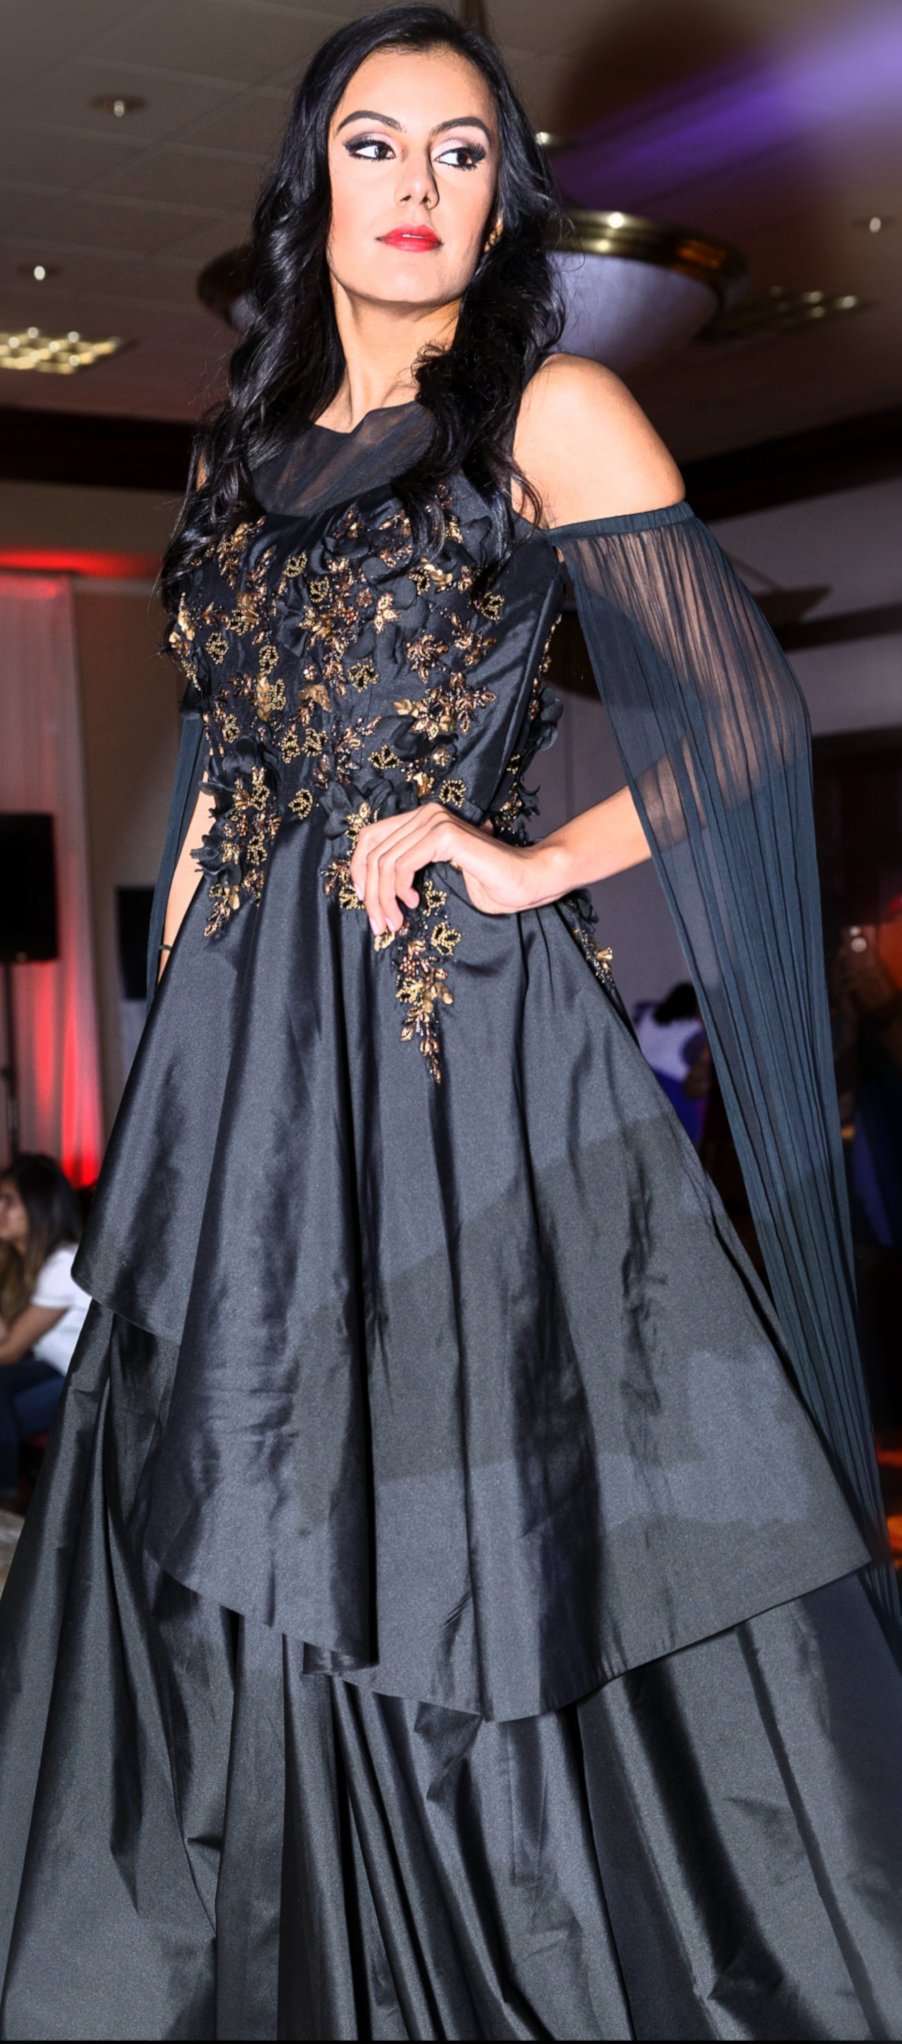 Custom Gothic Black Black Ballgown Wedding Dress With Sparkly Appliques,  Lace Corset Back, And Long Sleeves Plus Size Available From Mark776,  $146.74 | DHgate.Com